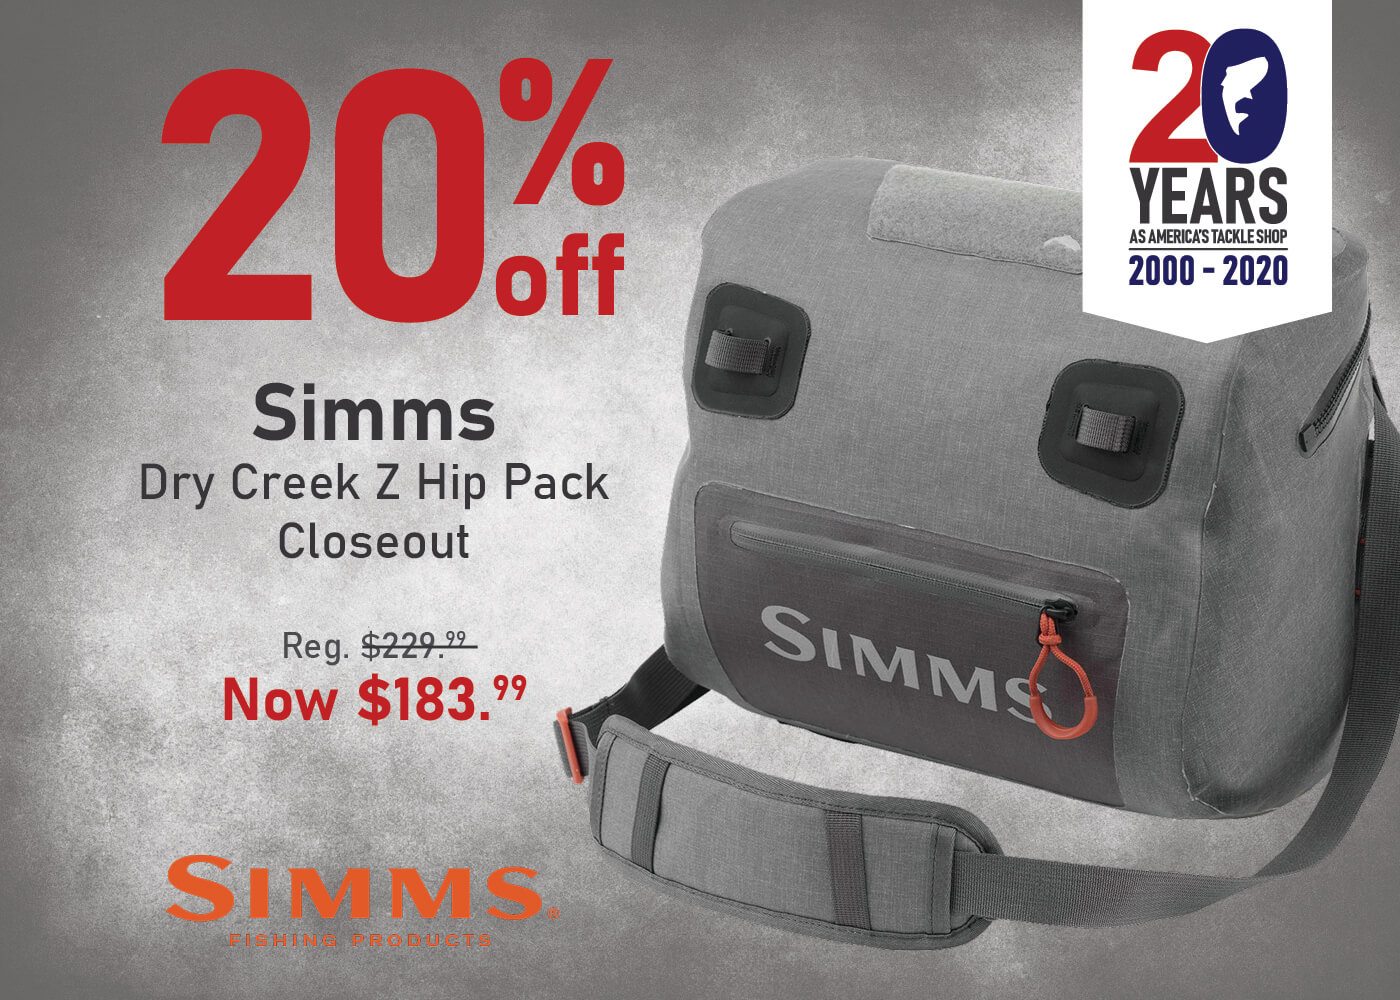 Save 20% on the Simms Dry Creek Z Hip Pack - Closeout